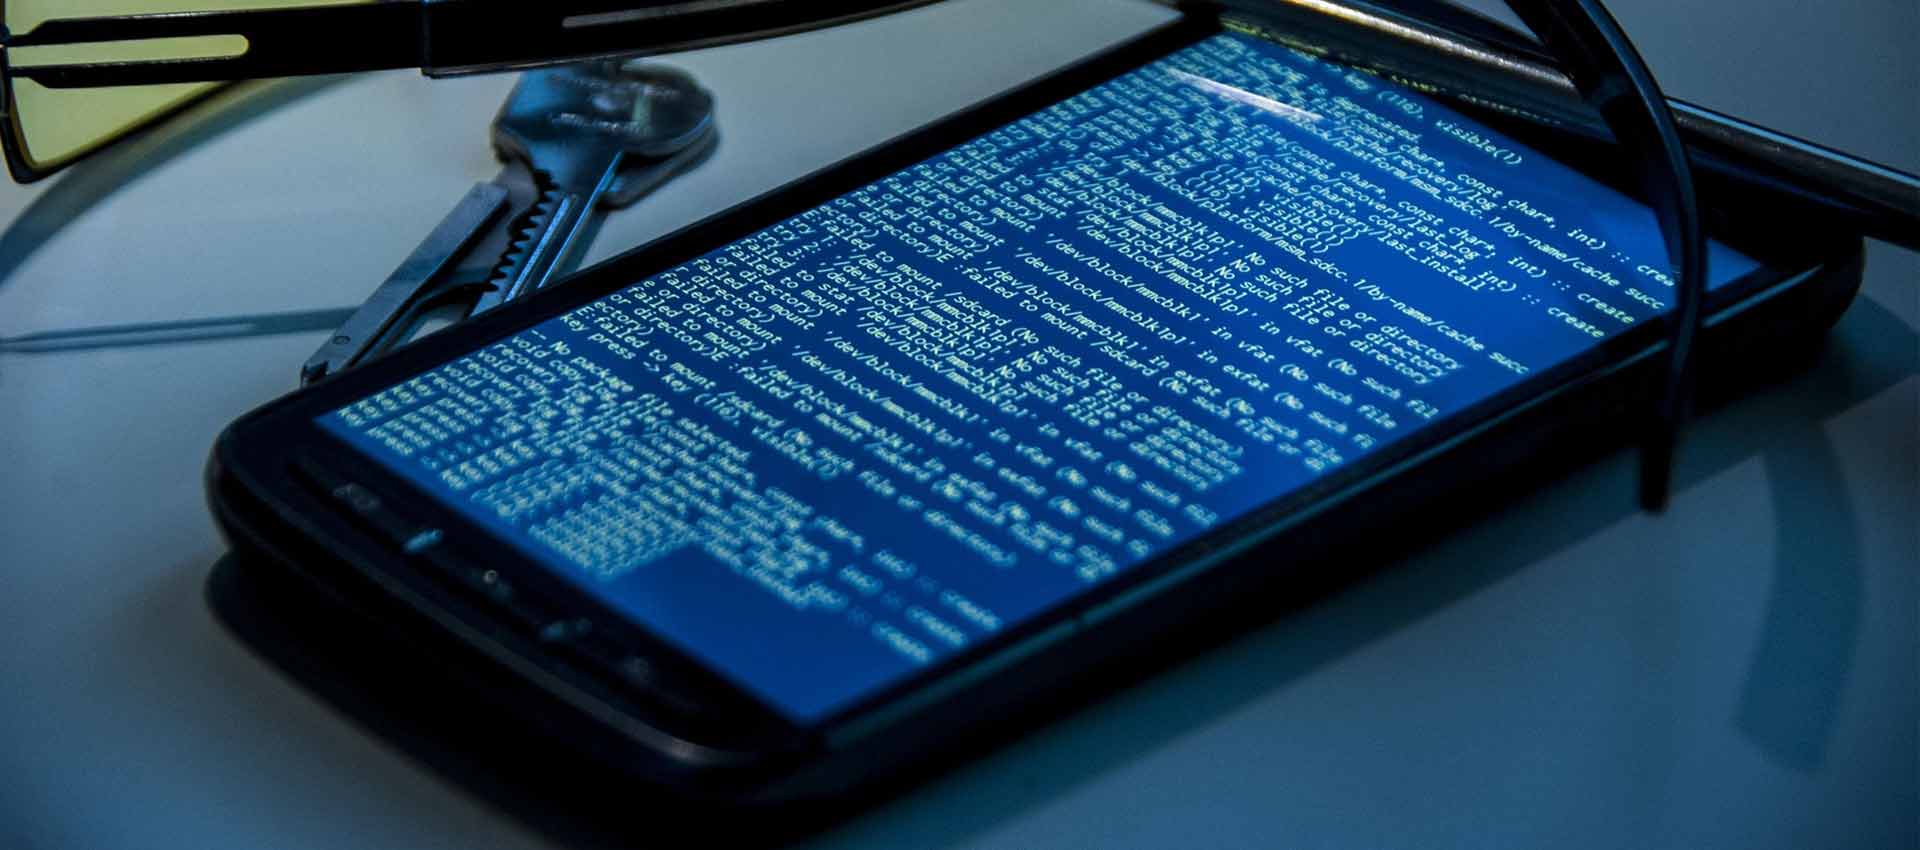 5 Ways to Protect your smartphones from hackers